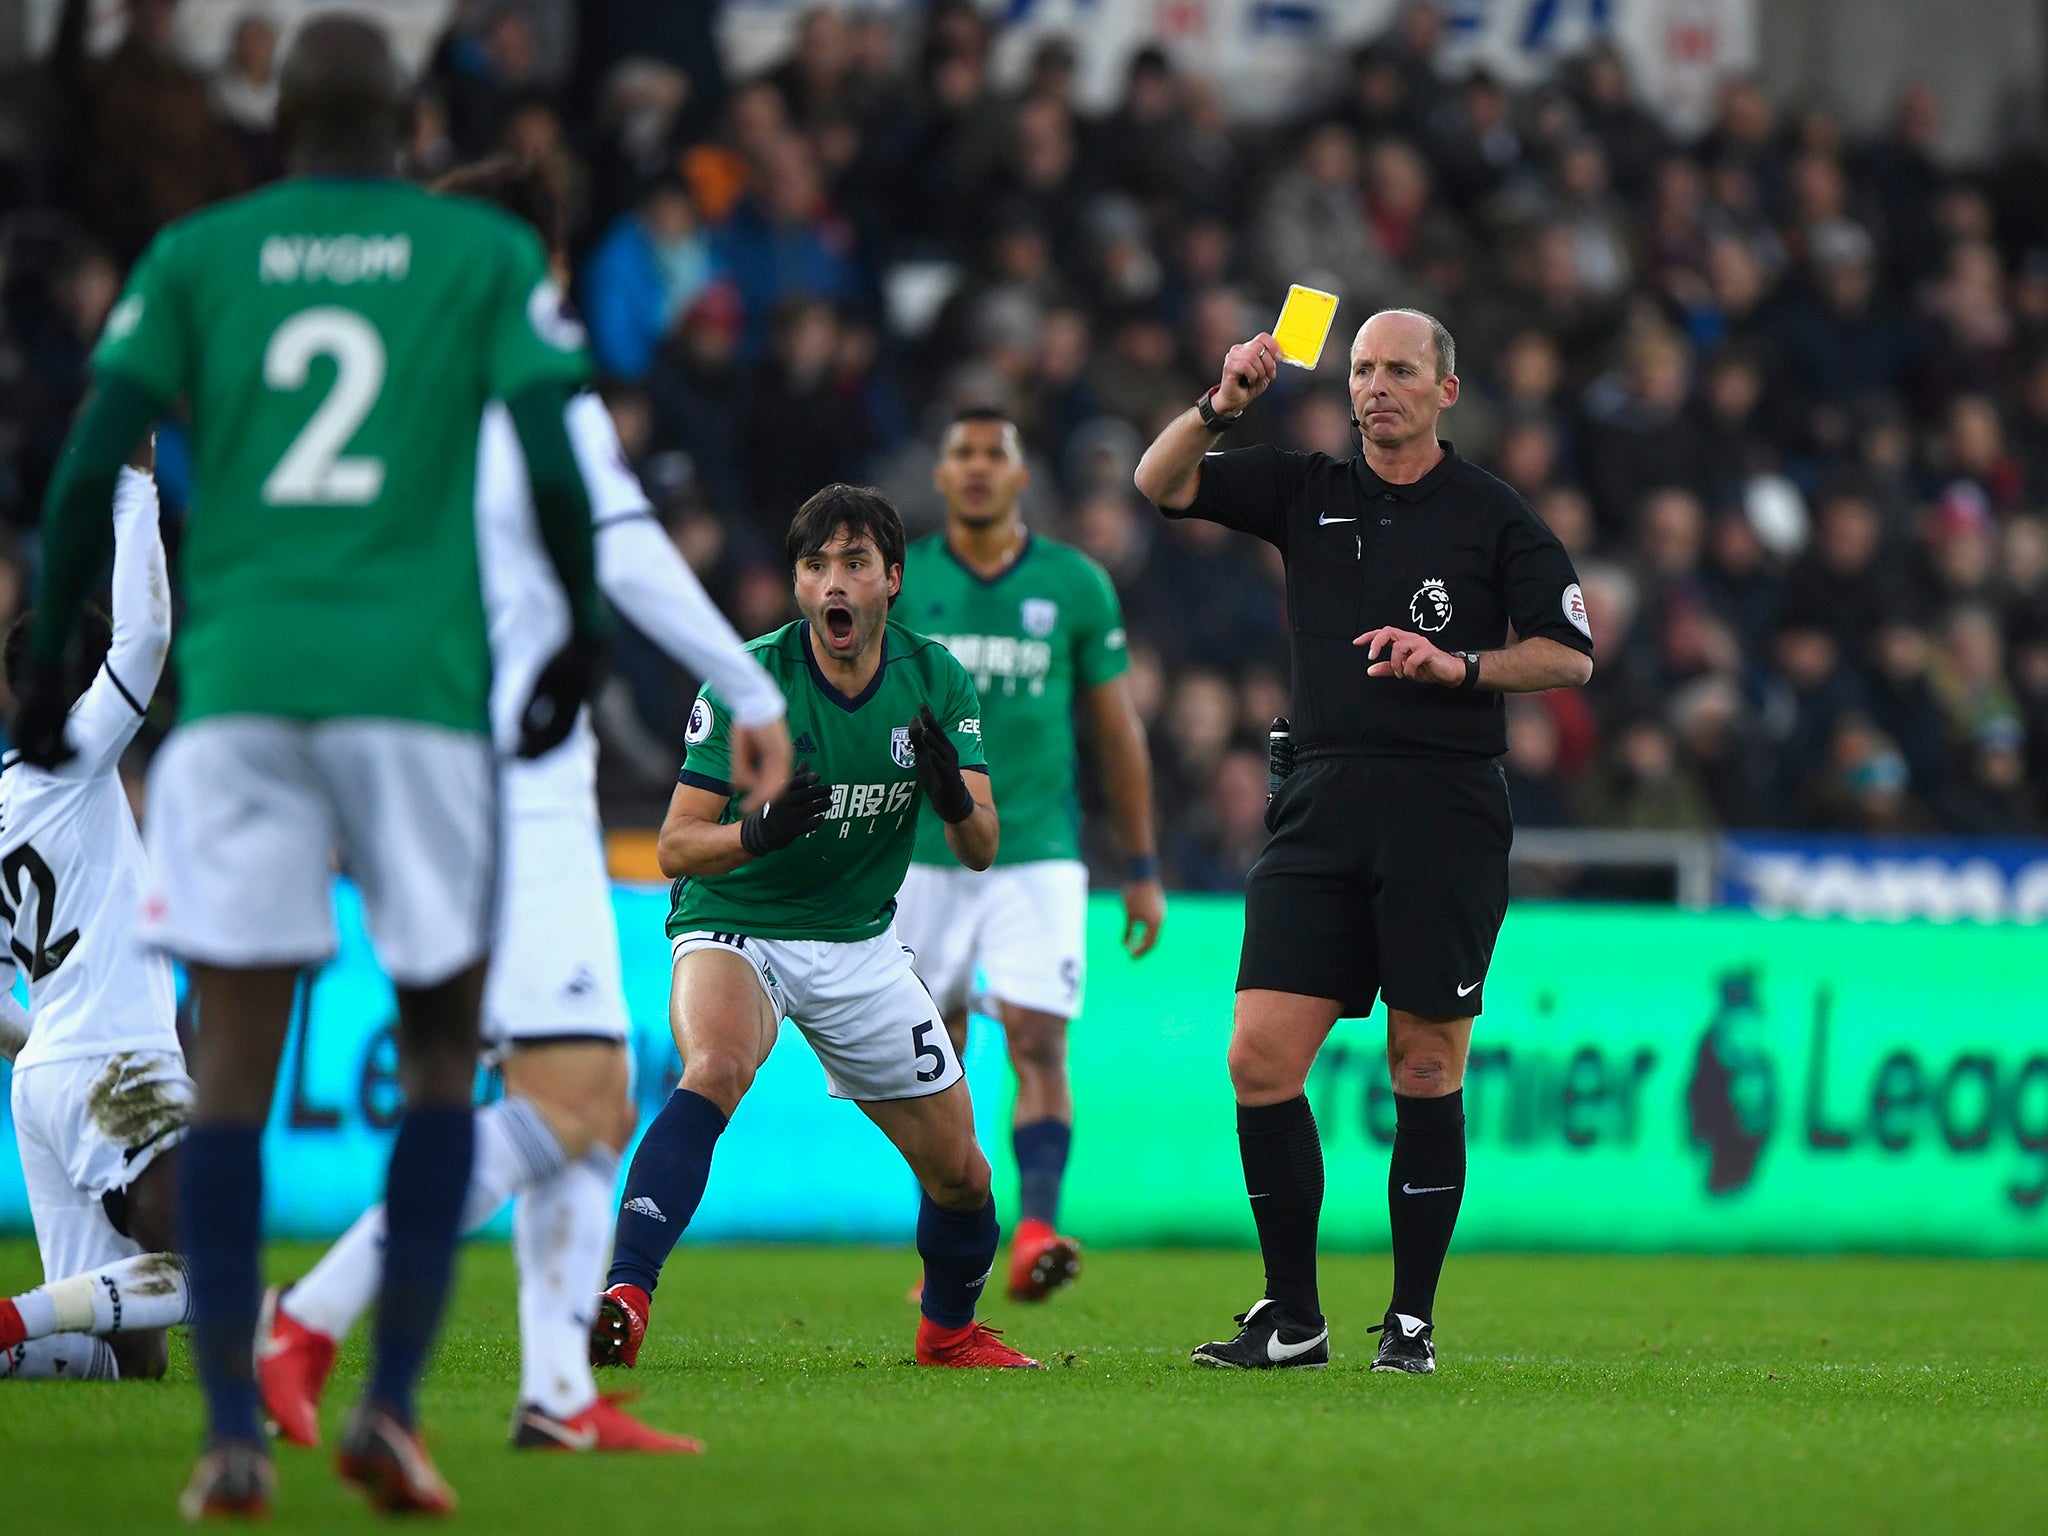 Referee Mike Dean books Claudio Yacob for a foul